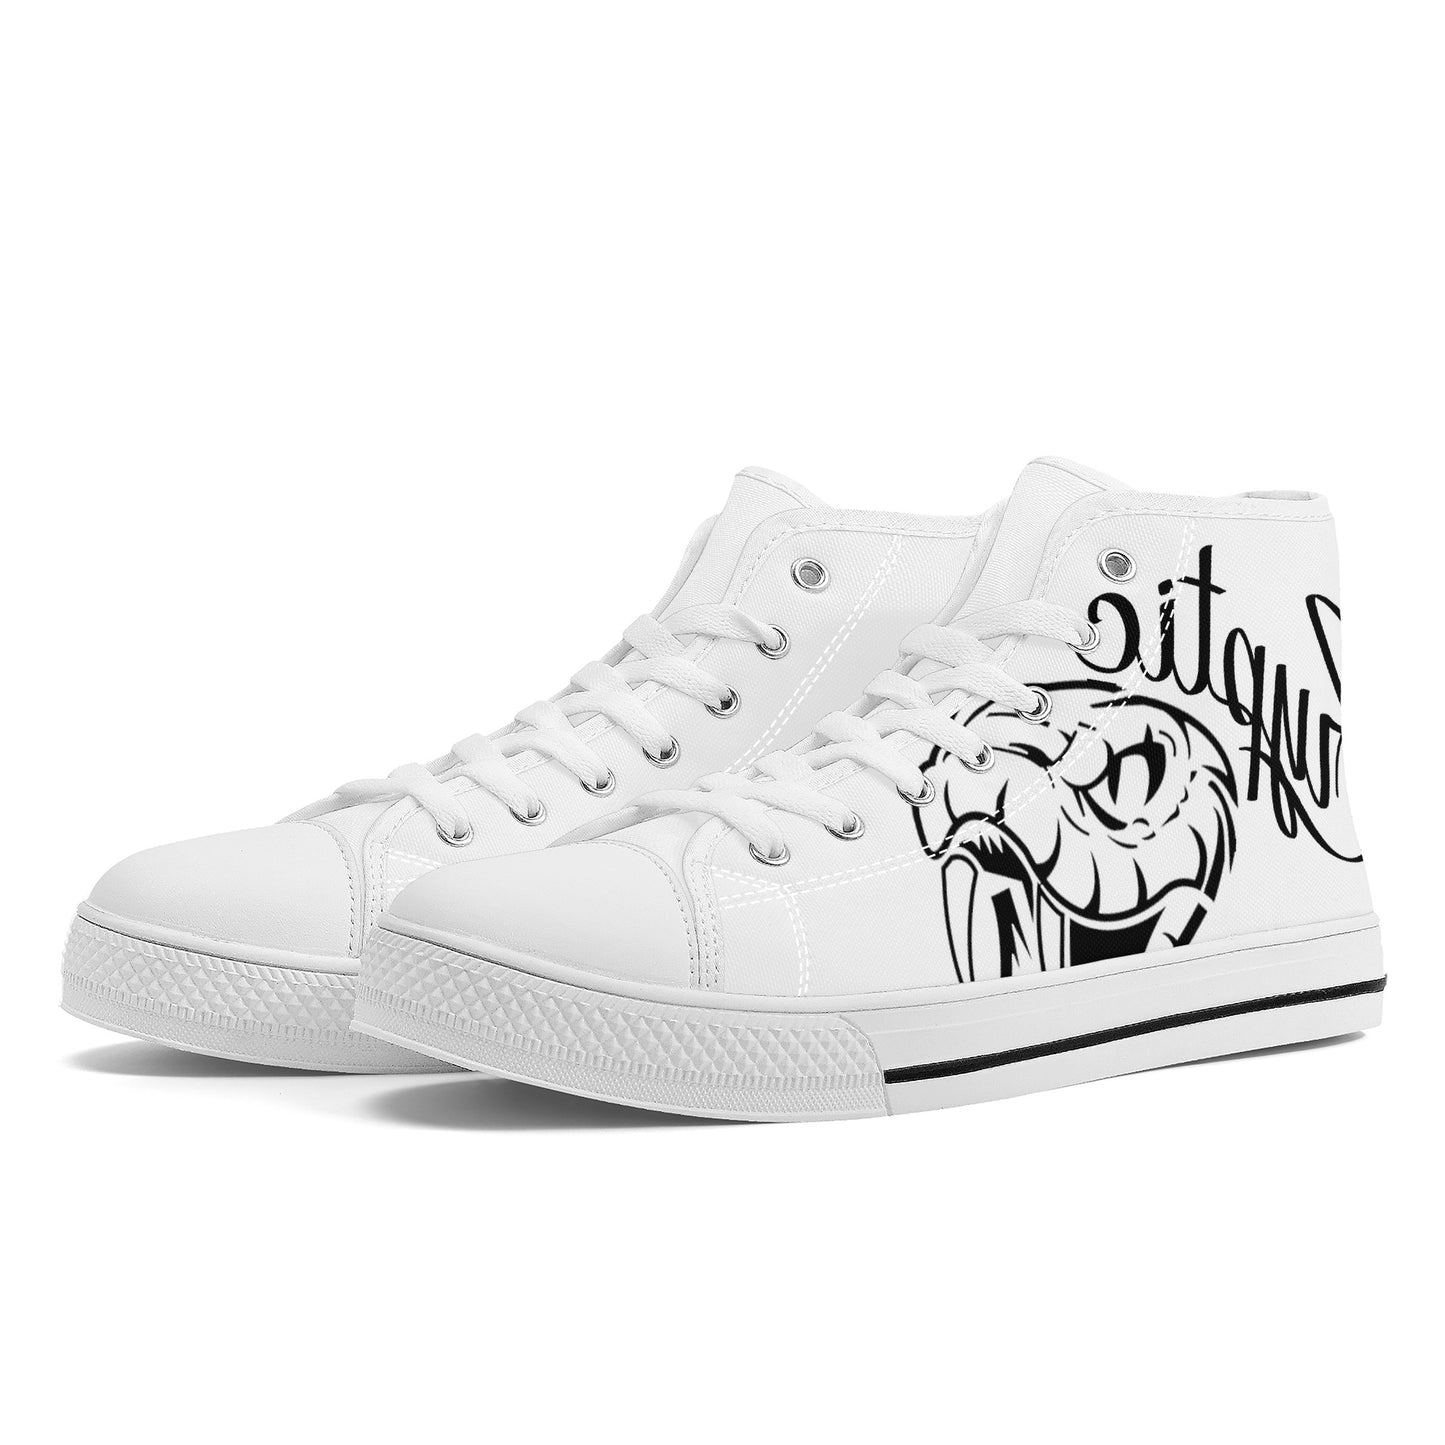 Cryptic High-Top Canvas Shoes With Customized Tongue, White